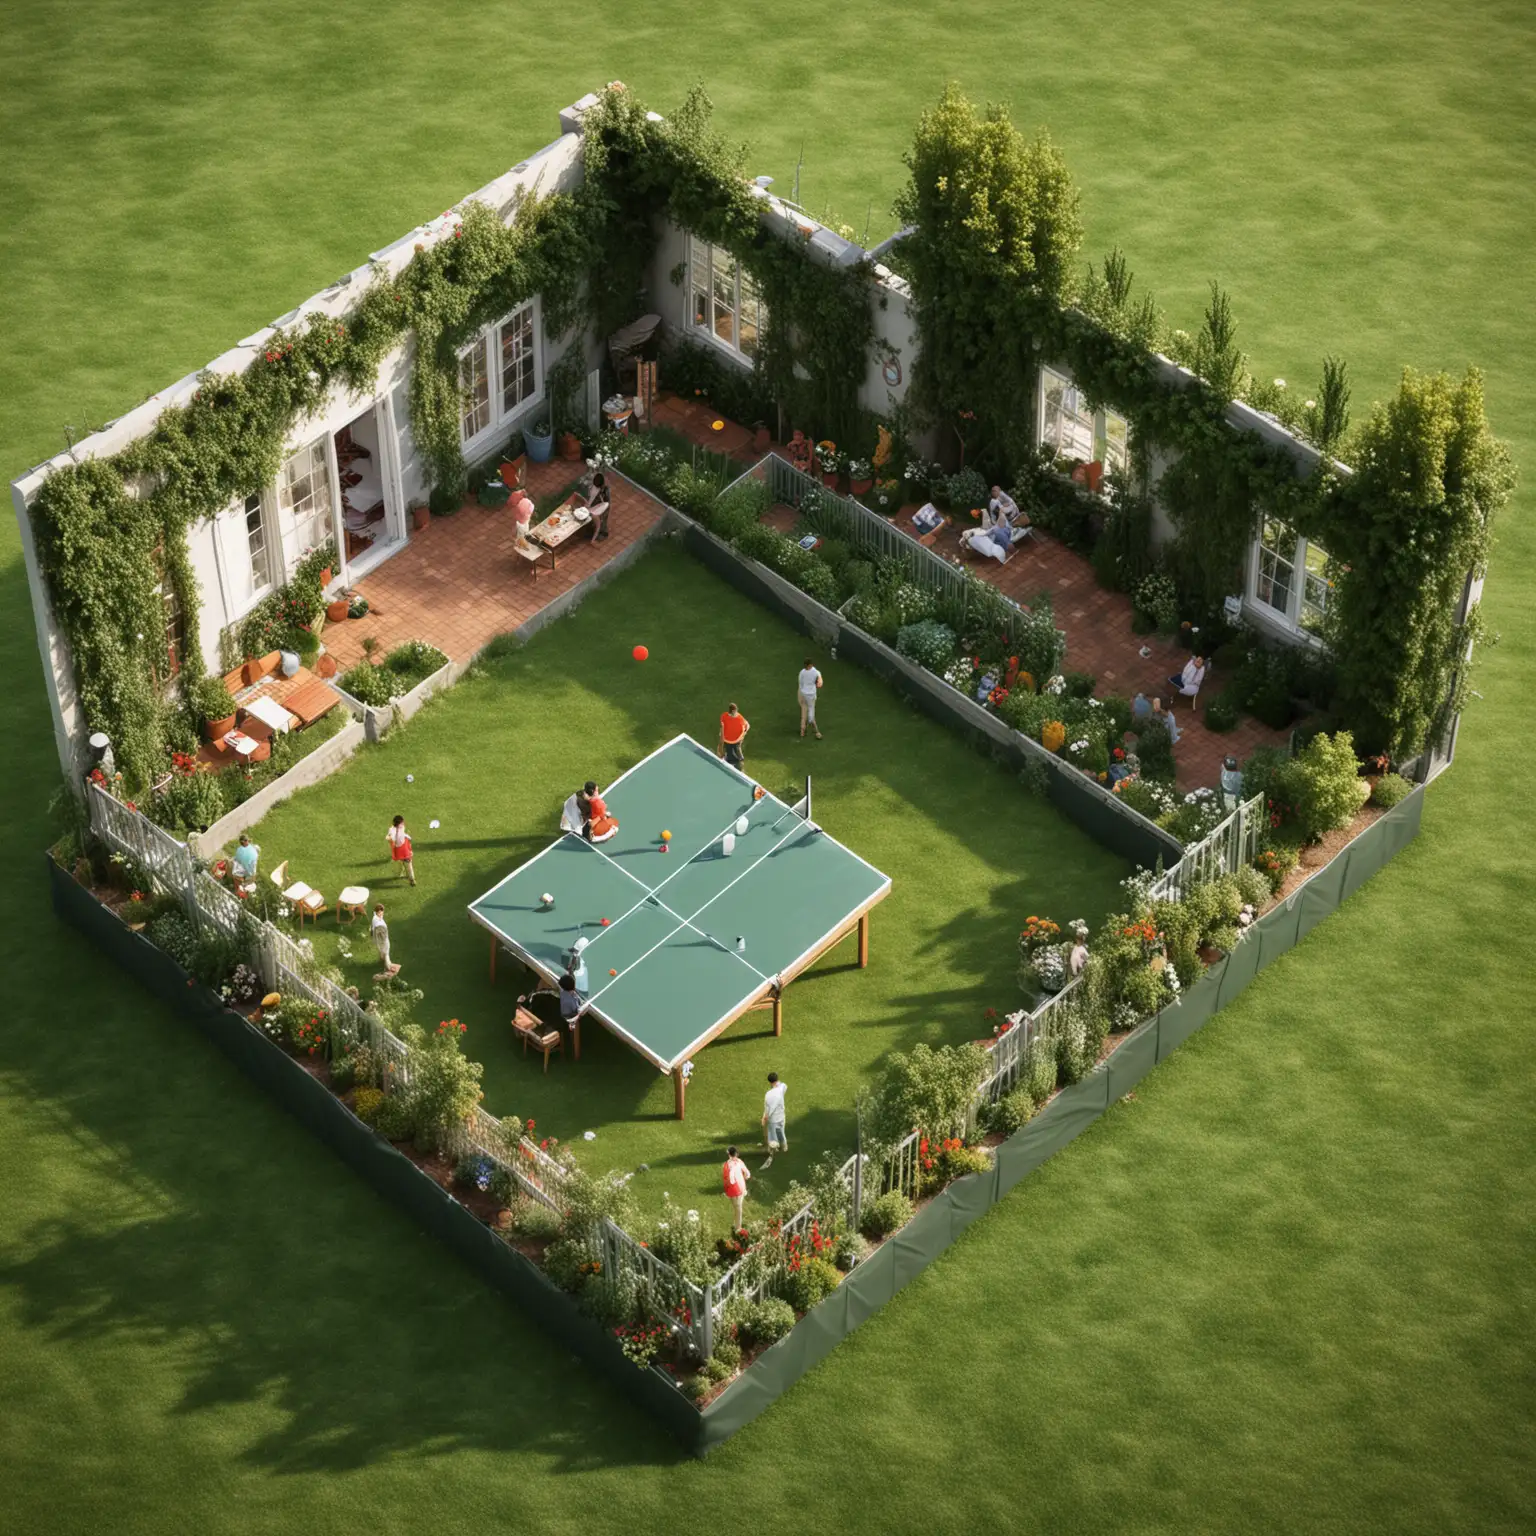 Create an isometric room.
Where it is a leisure activity. a 15m room². this room should be a garden with a Picnic blanket. so a floor out of grass. a tabletennis and a friend group of 5 drinking wine and play tabletennis - a lot of fun. please be realistic. no tables only the garden-flair